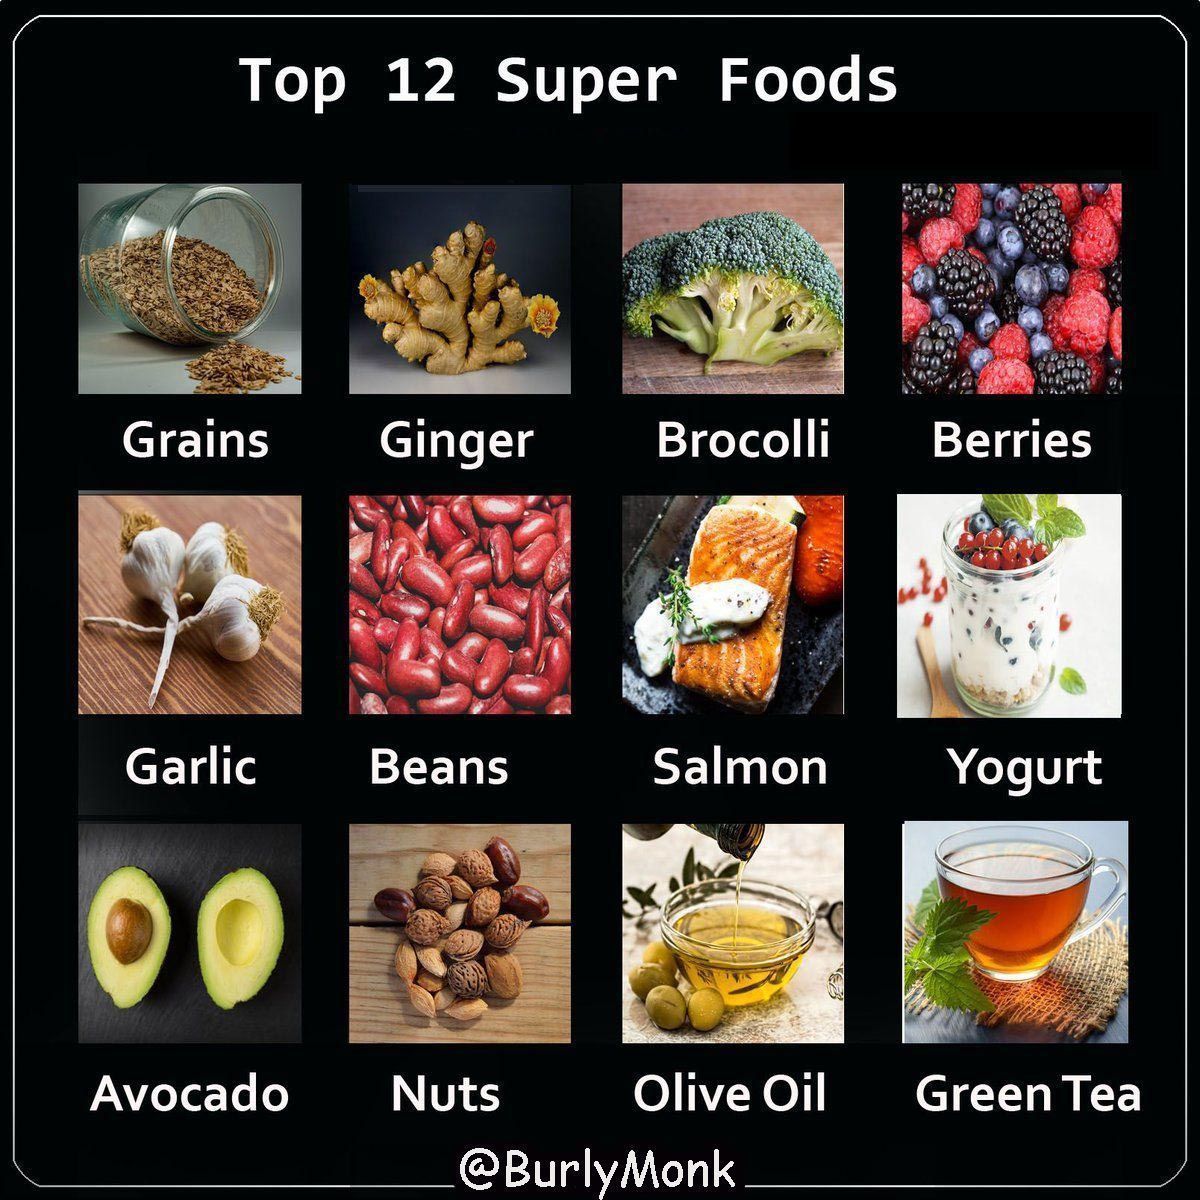 Consider incorporating these 12 superfoods into your diet for improved nutrition and health. #Nutrition #SuperFoods #Mediterraneandiet  #Health #NutritionIsMedicine